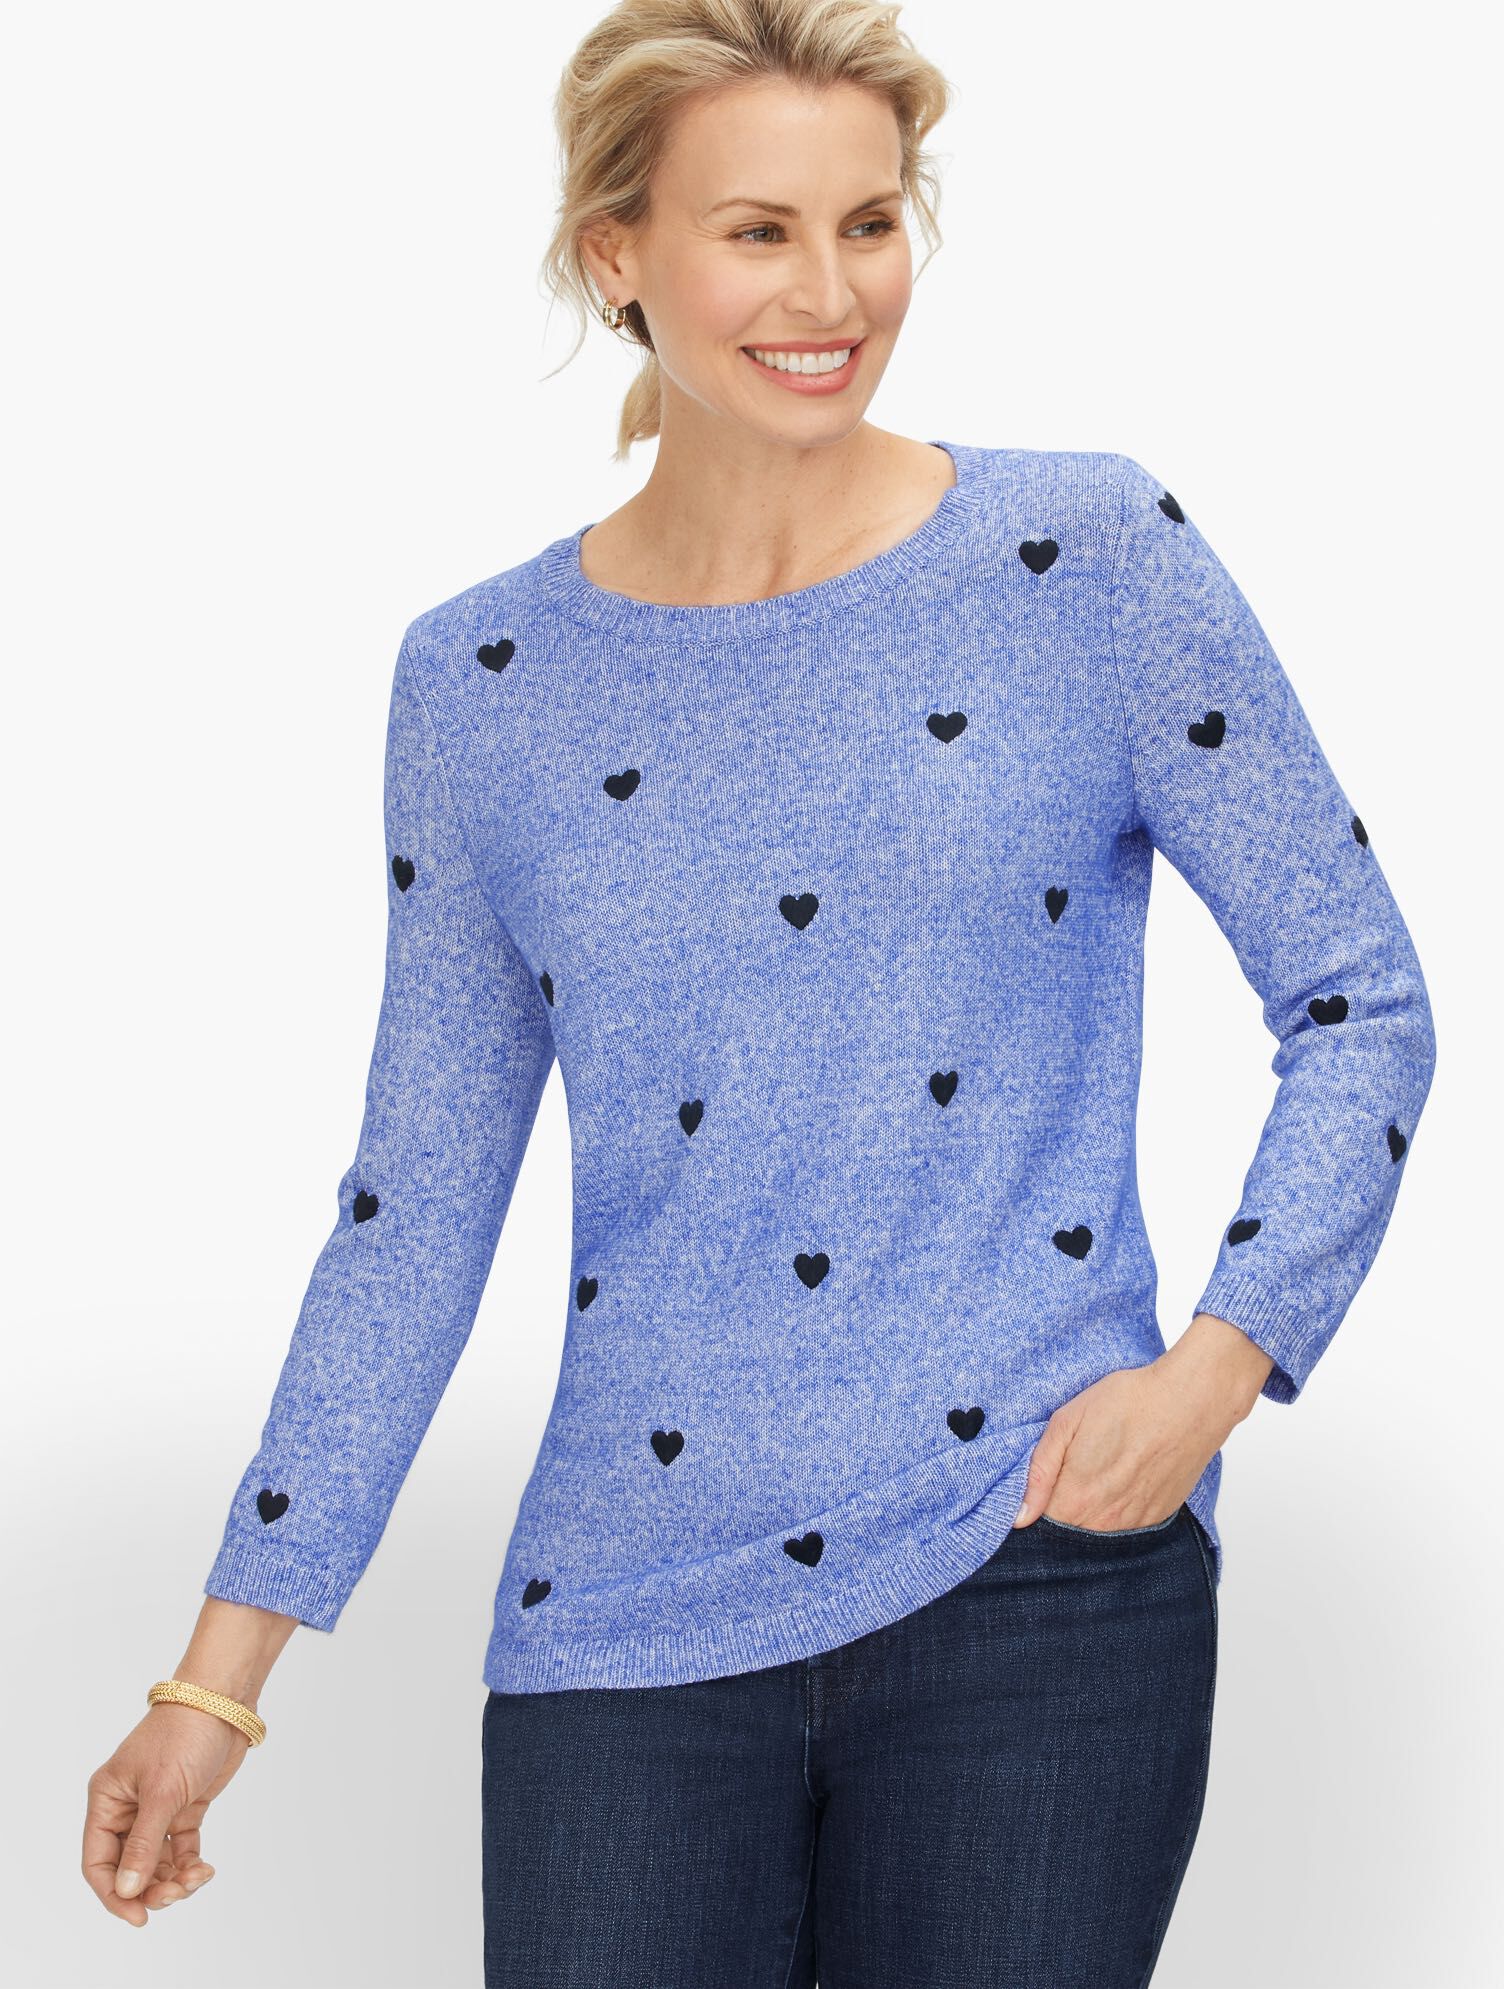 Embroidered Hearts Crewneck Sweater